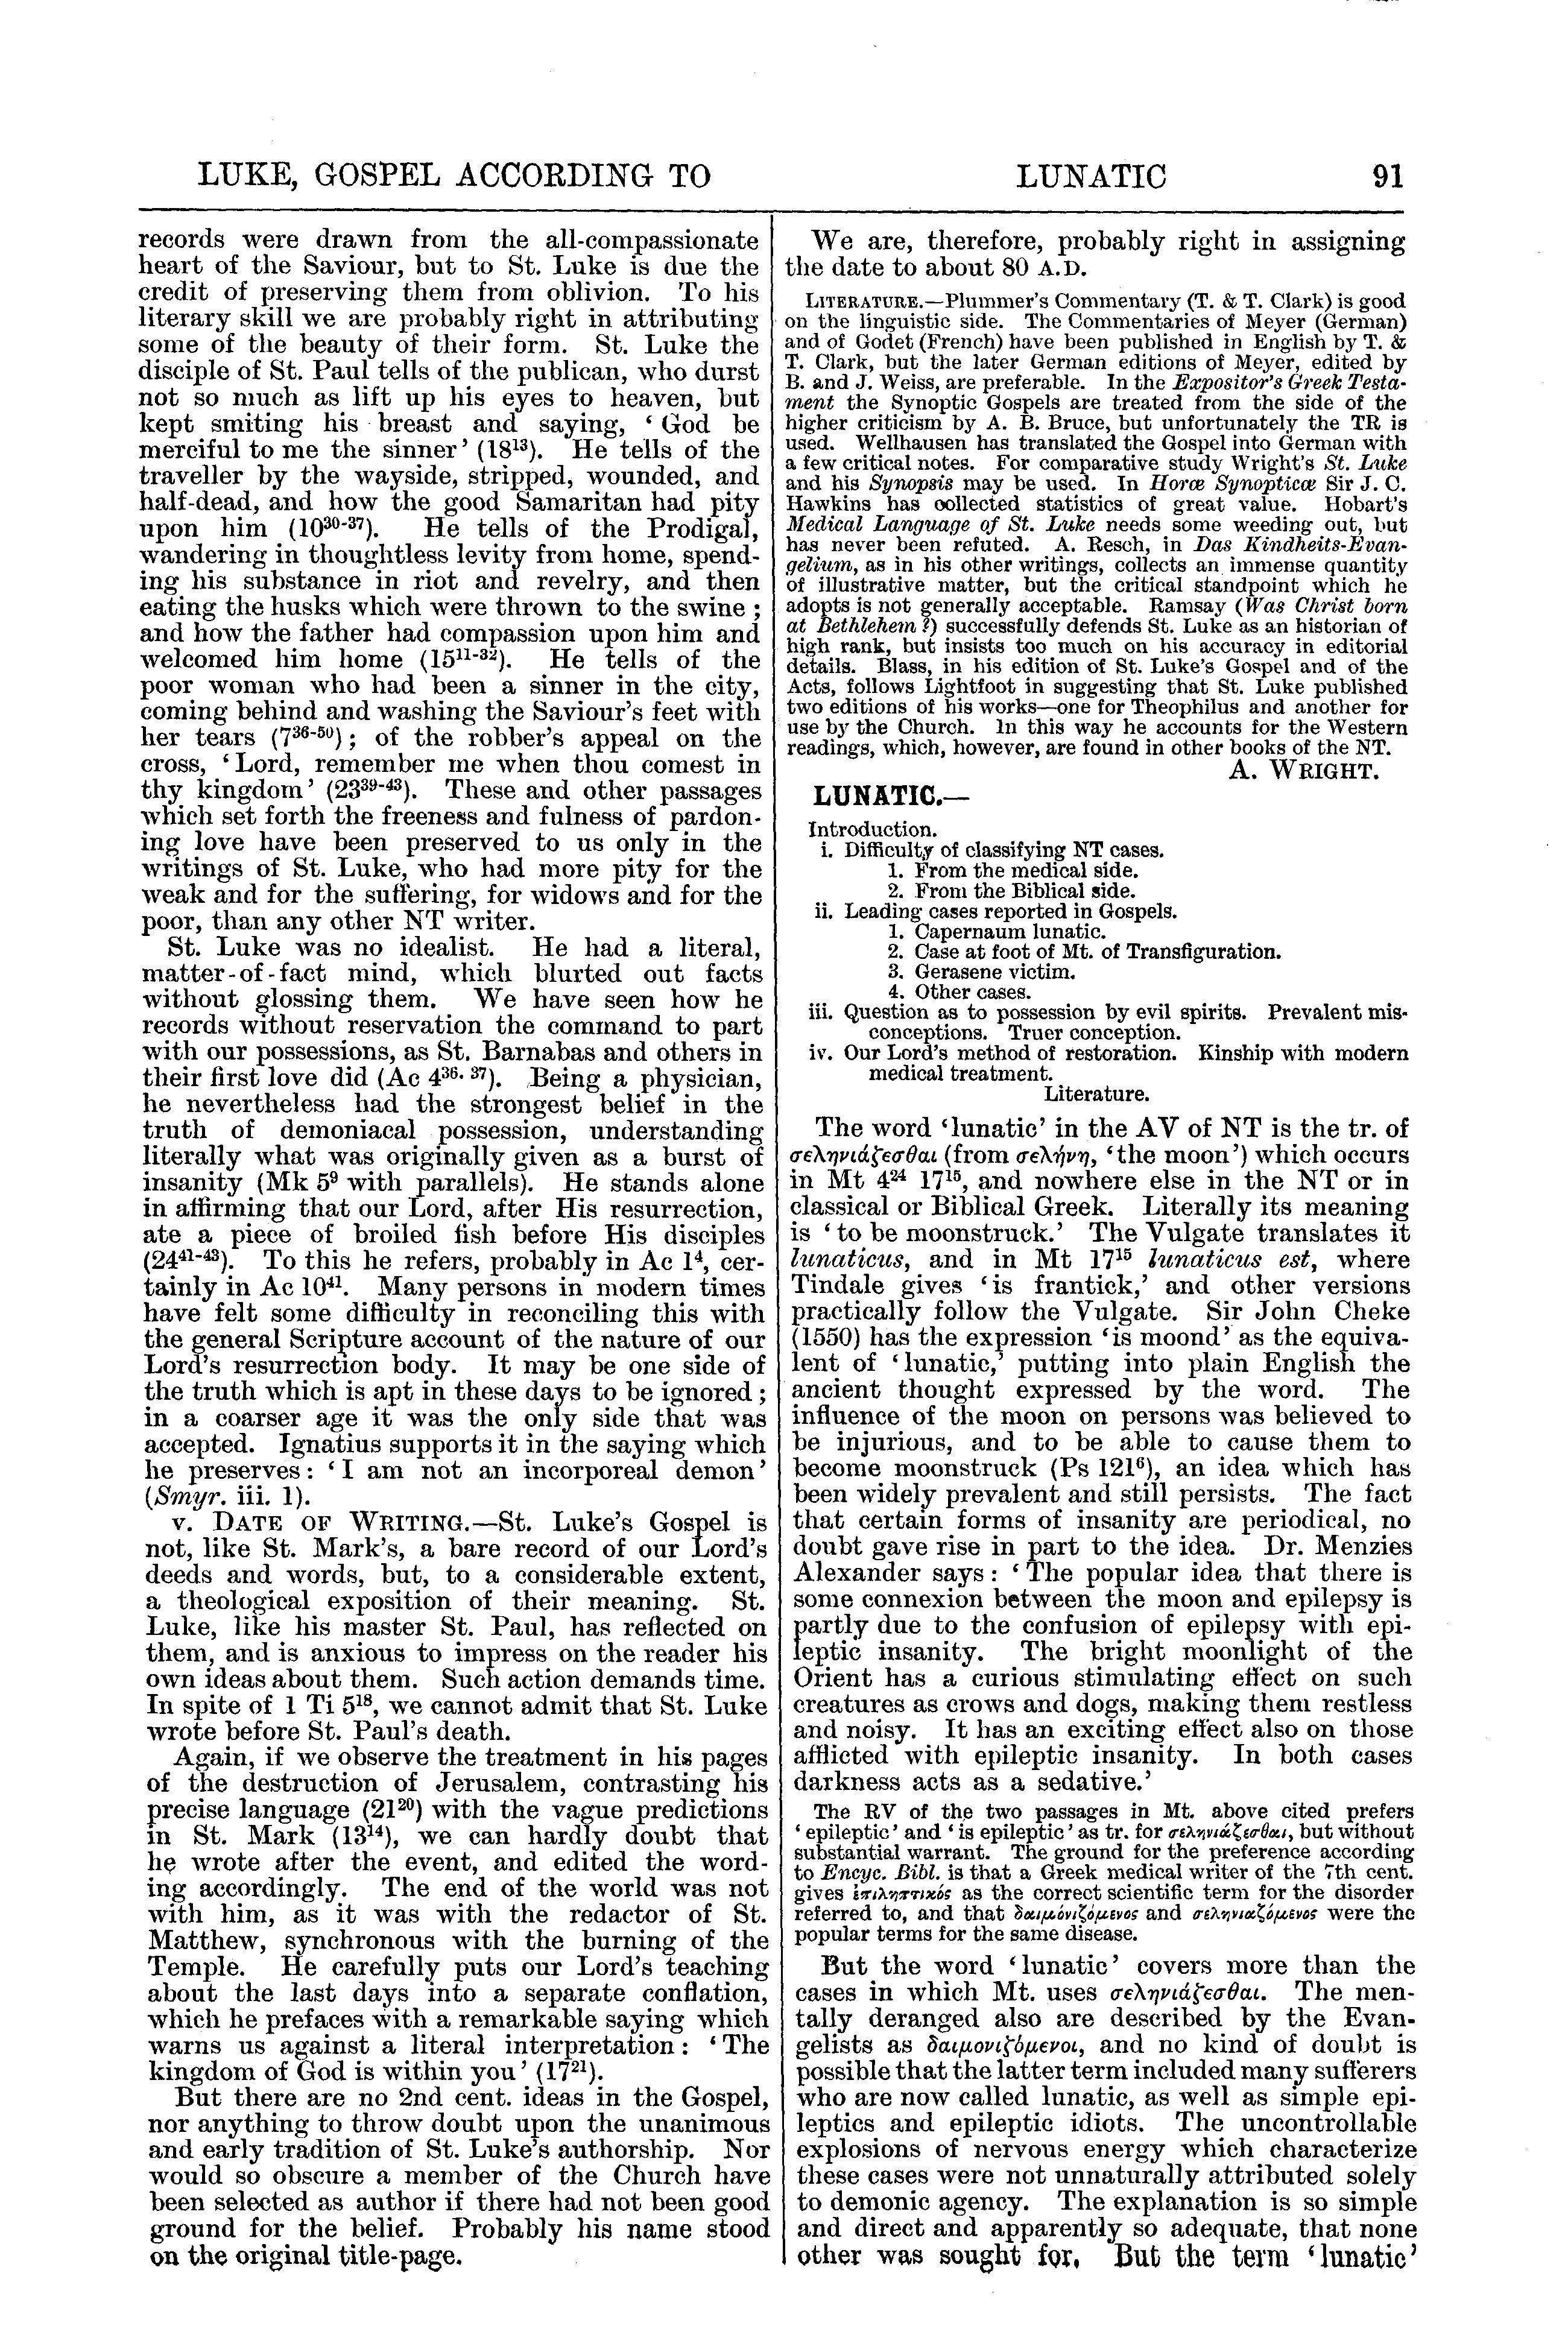 Image of page 91